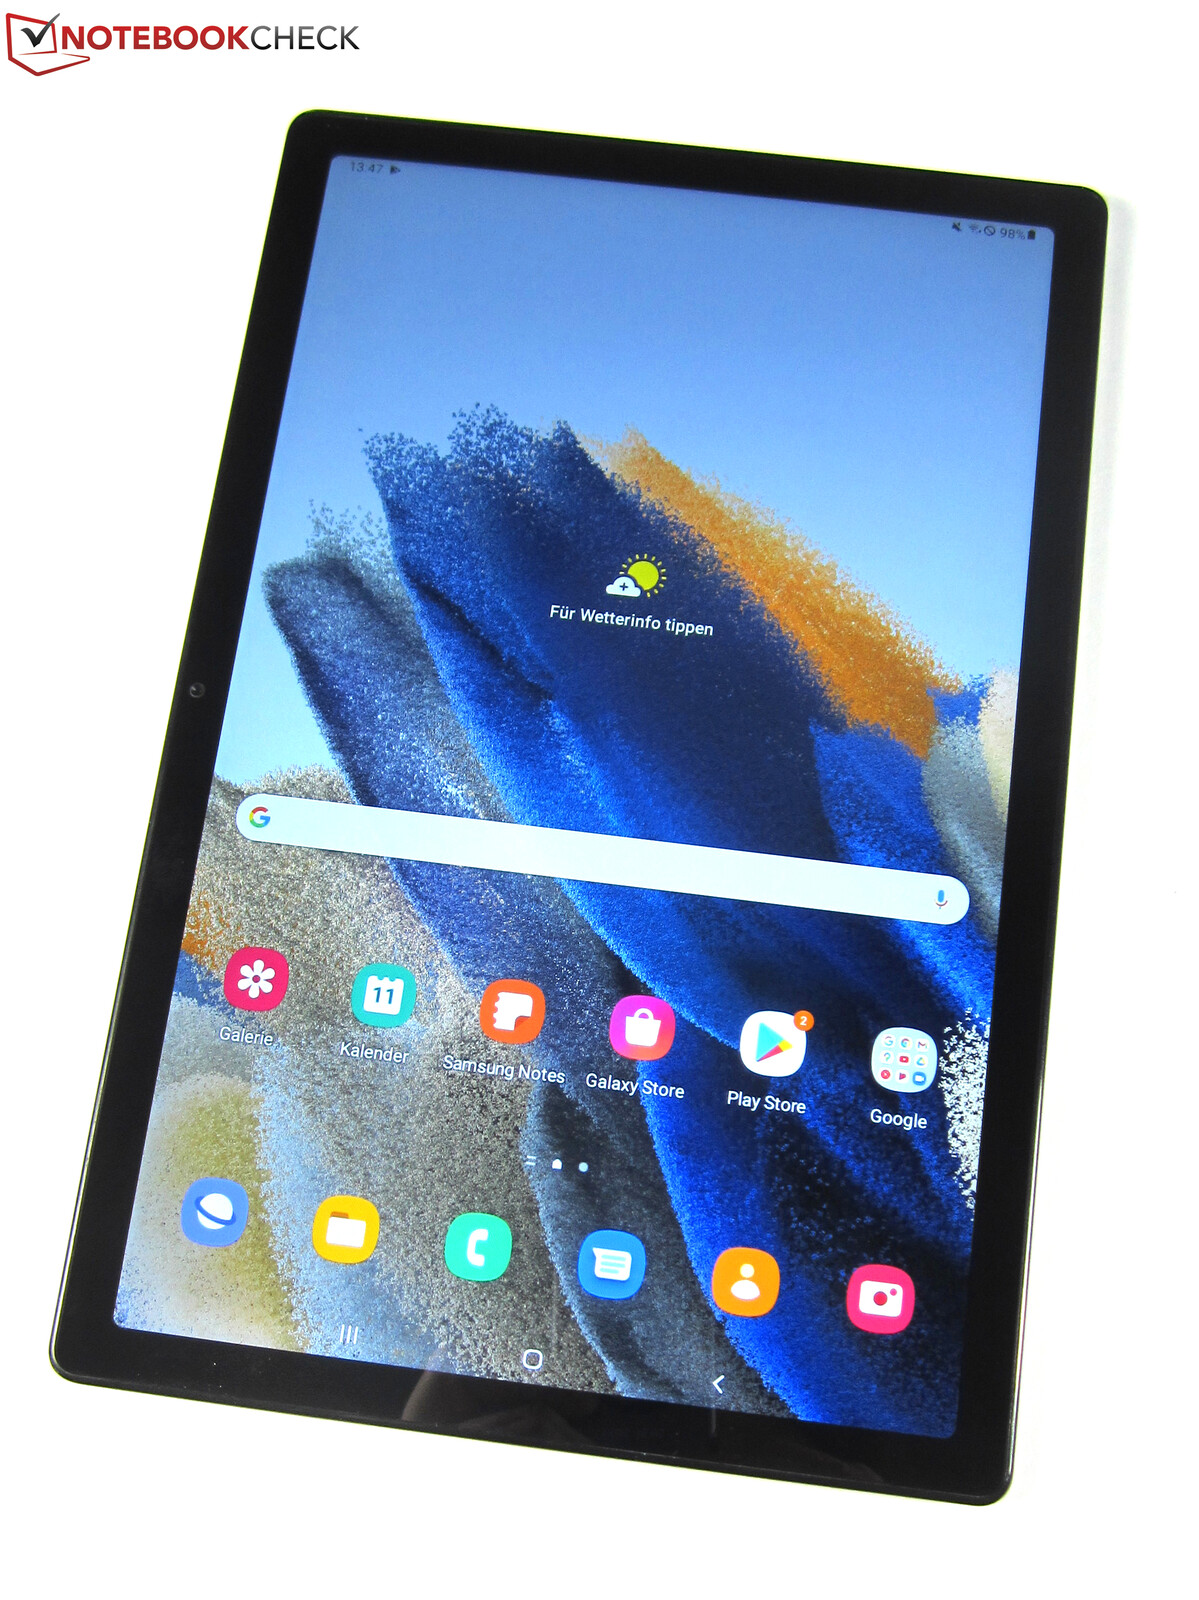 Samsung Galaxy Tab A8 of NotebookCheck.net The - News new tablet the affordable mid-range edition 